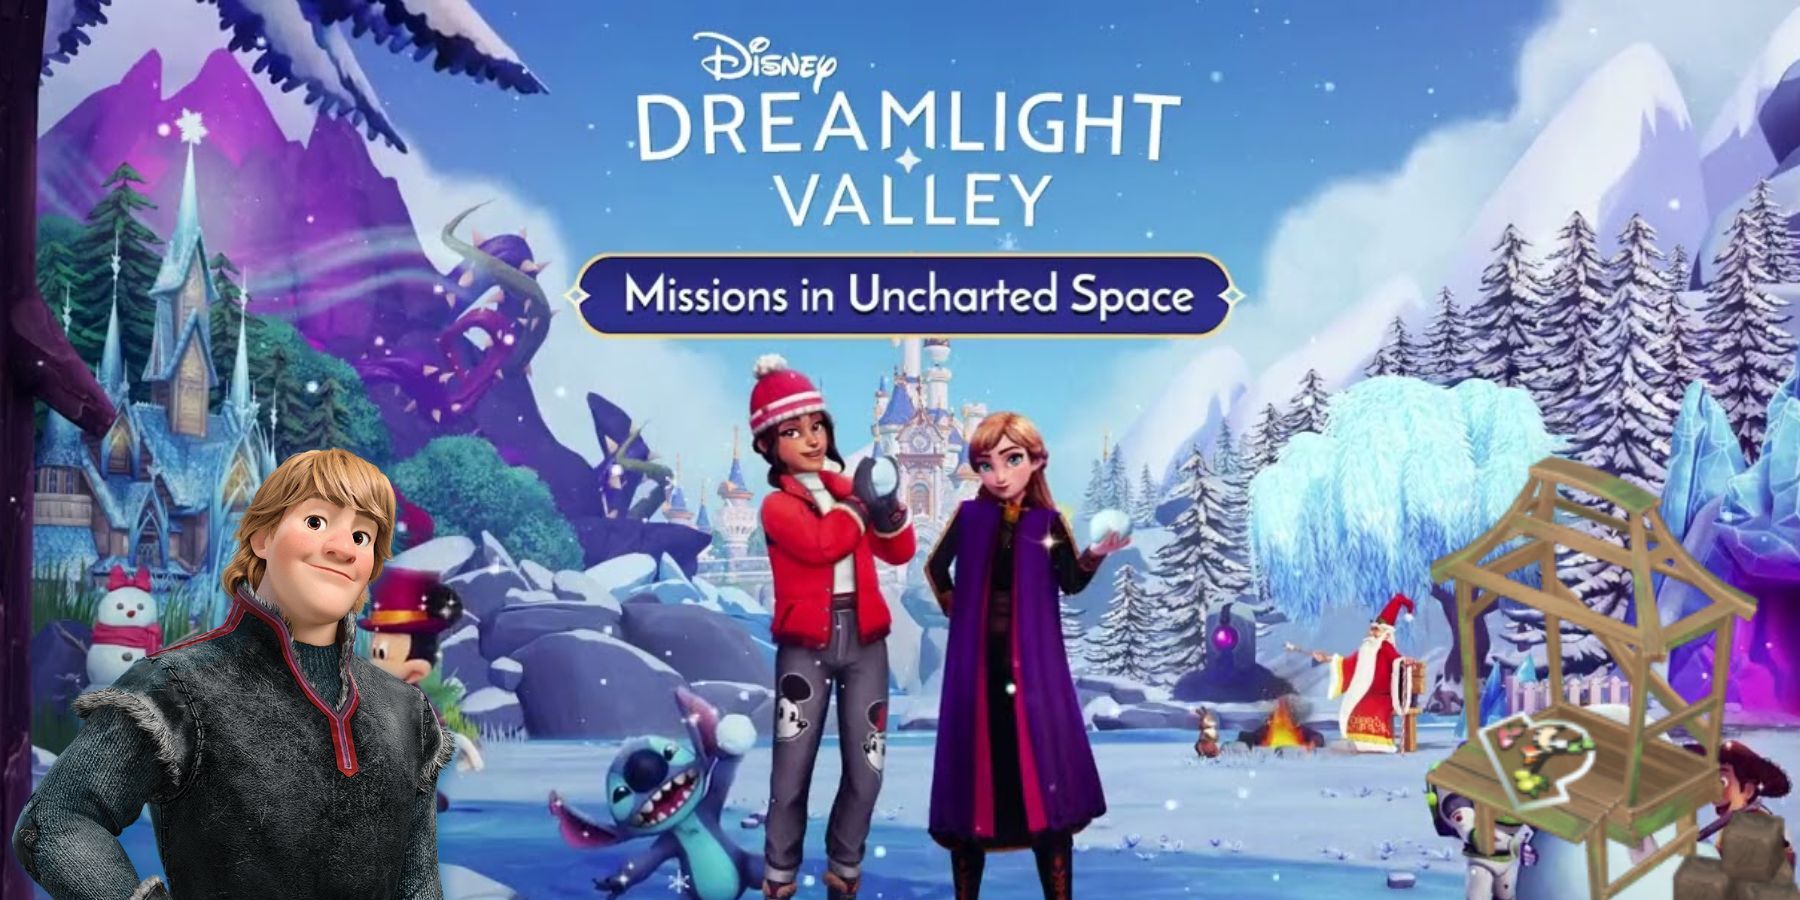 dreamlight valley missions in uncharted space kristoff's stall